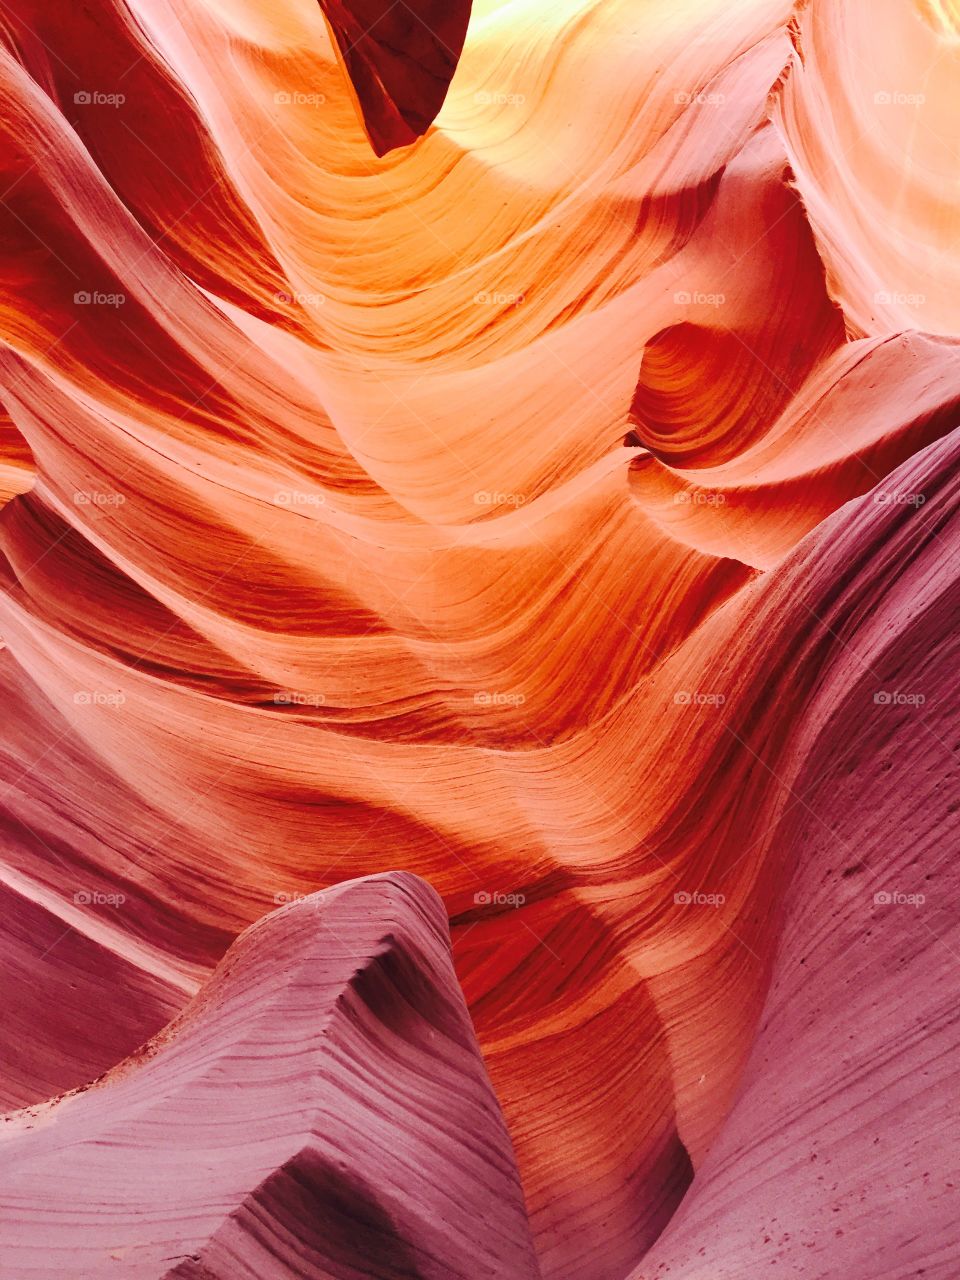 Crevices and peaks found in Antelope Canyon, Arizona 